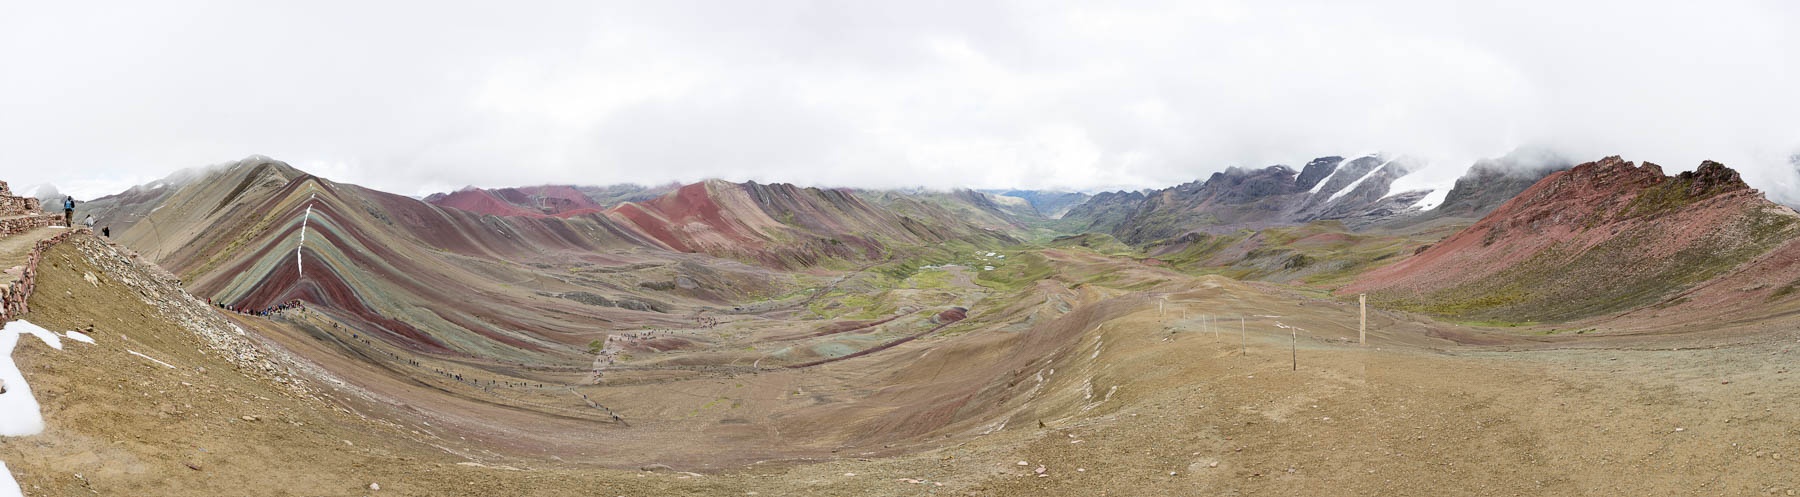 Looking west from Vinicunca